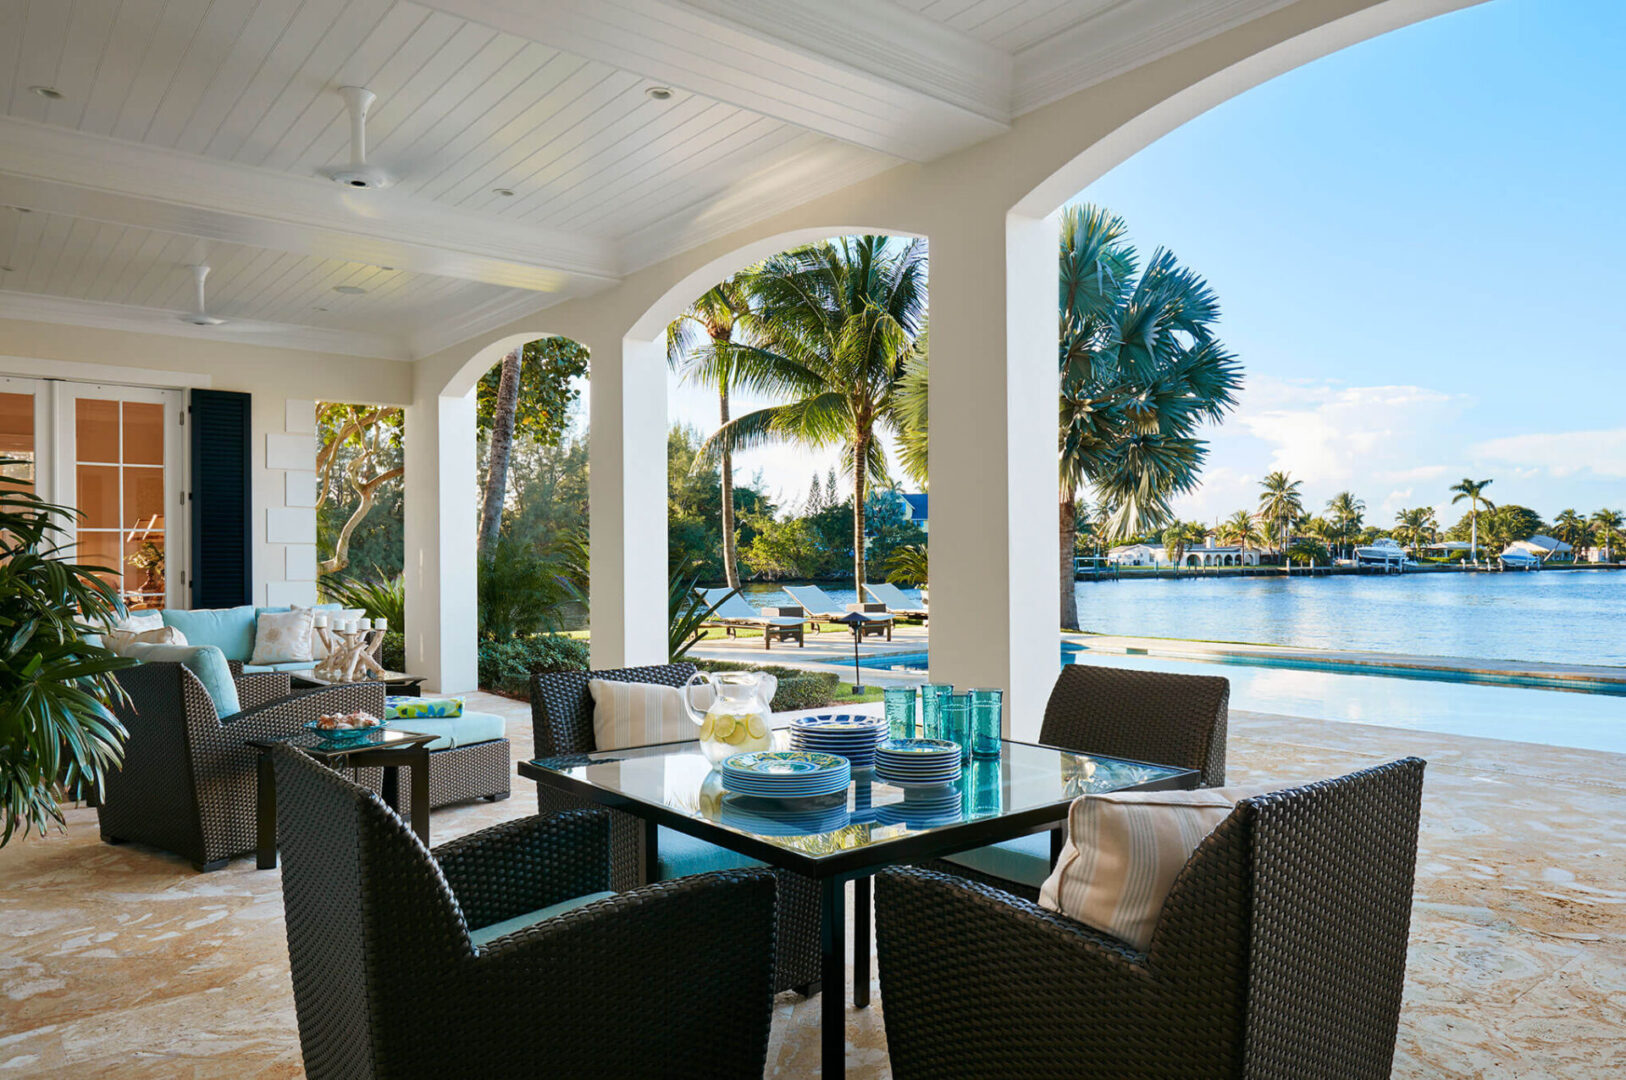 A patio with tables and chairs overlooking the water.